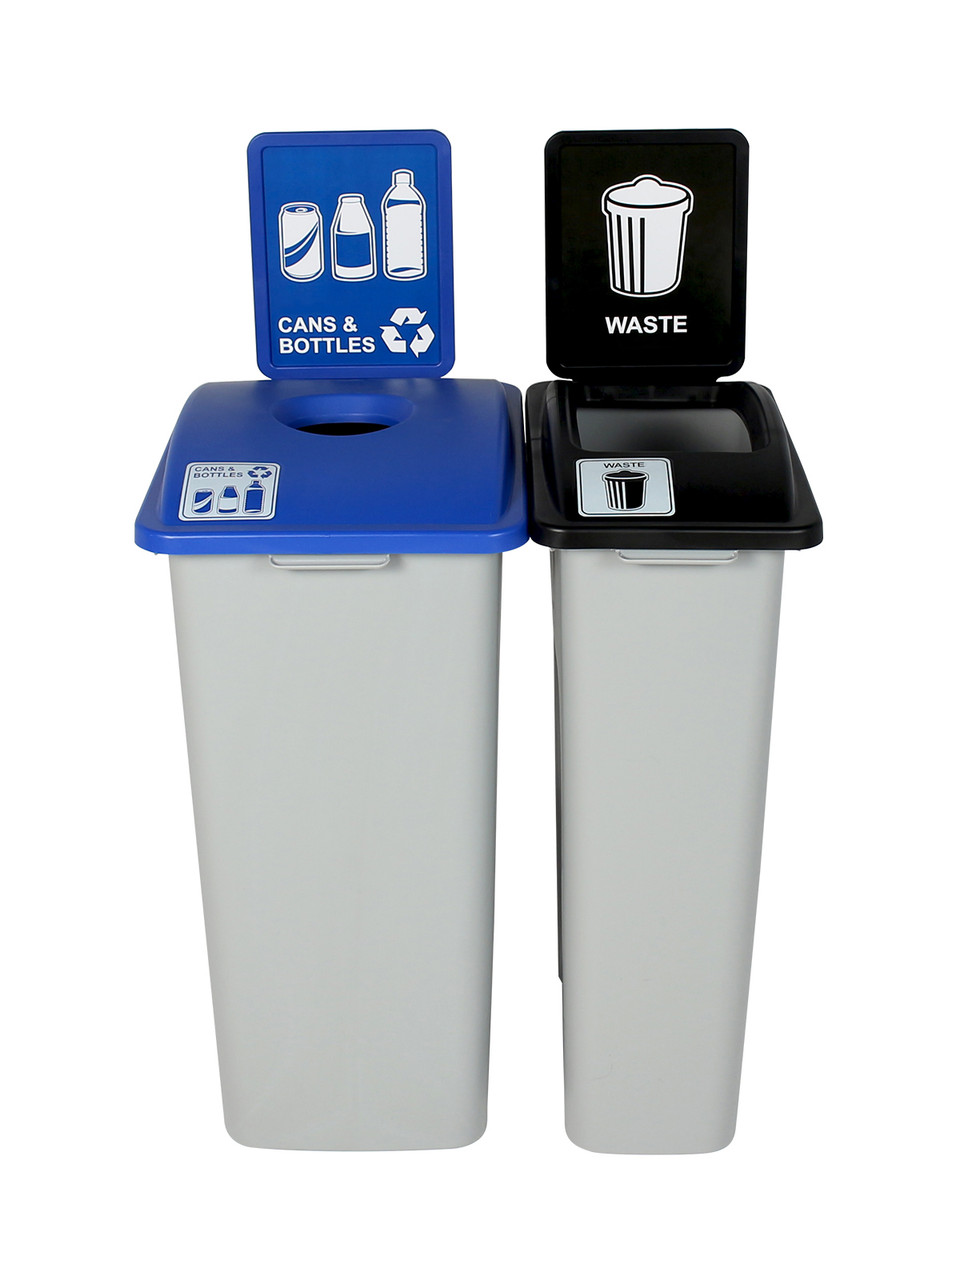 55 Gallon Simple Sort Trash Can Recycle Bin Combo 8111034-14 (Circle, Waste Openings)